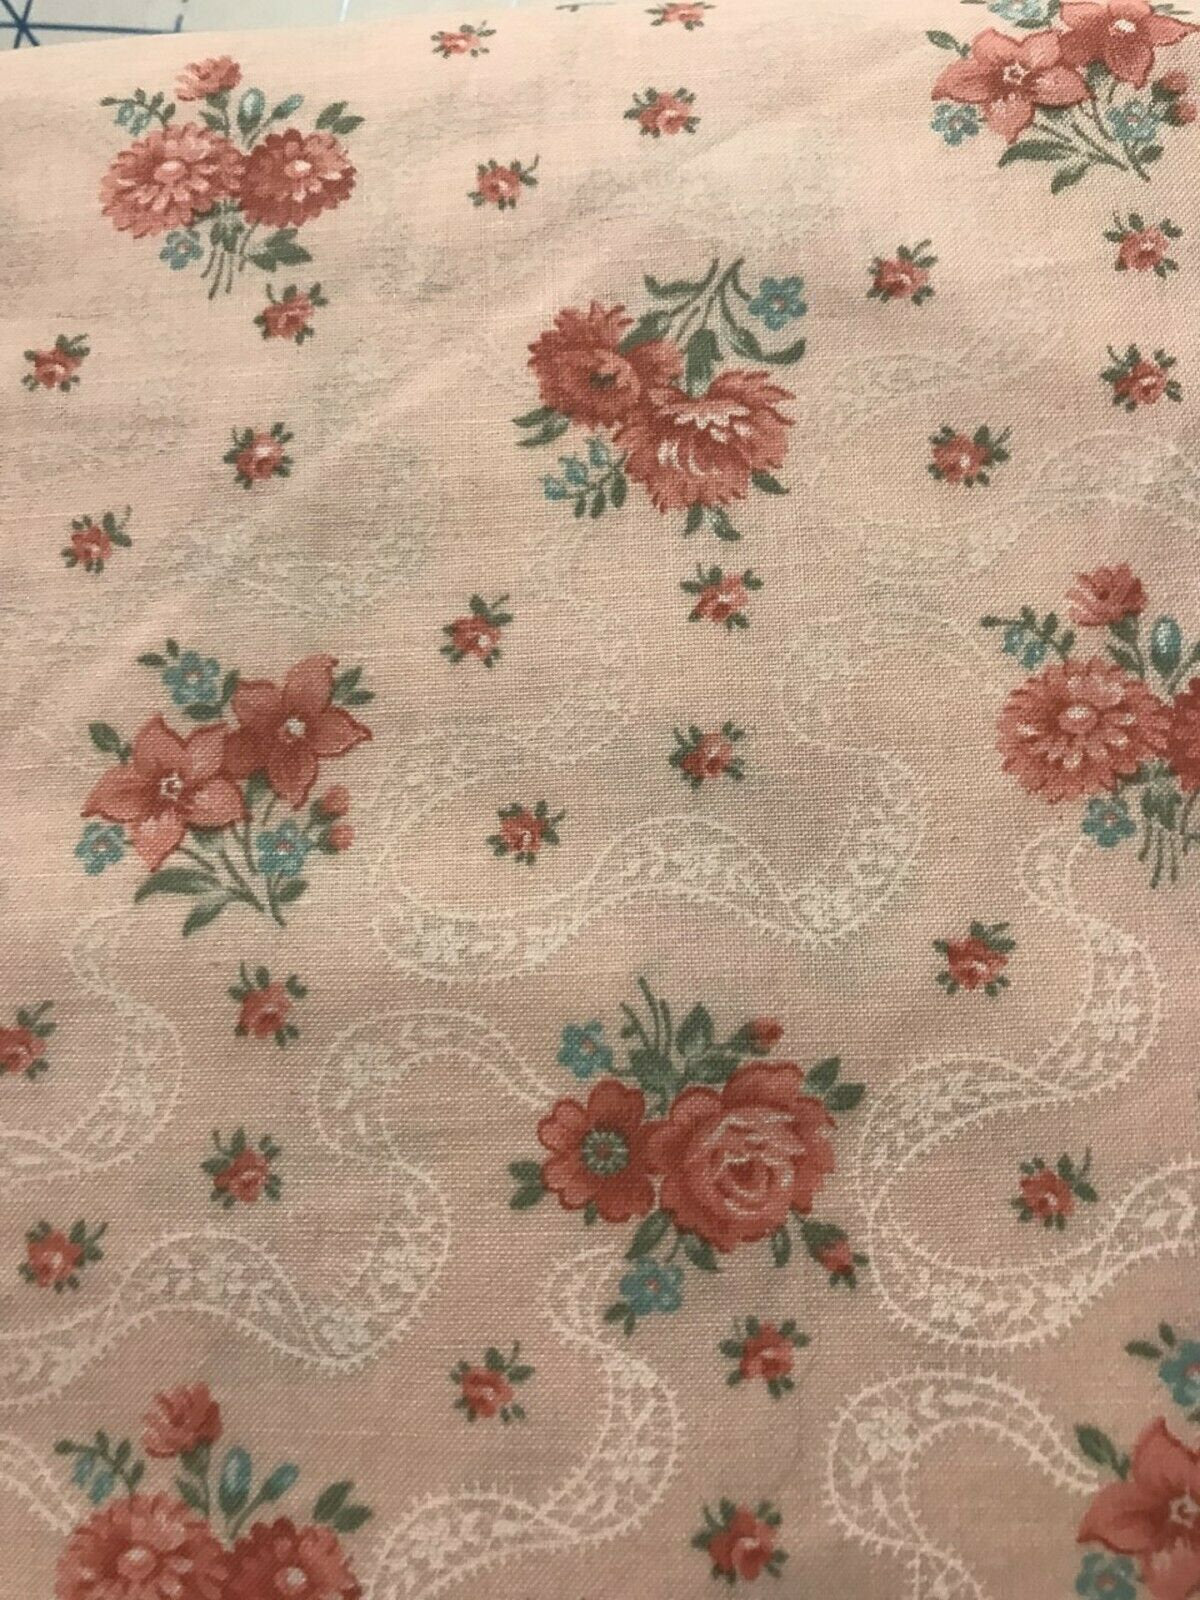 Rose Floral on Pastel Pink & Lace B/G-VIP Fabrics-BTY